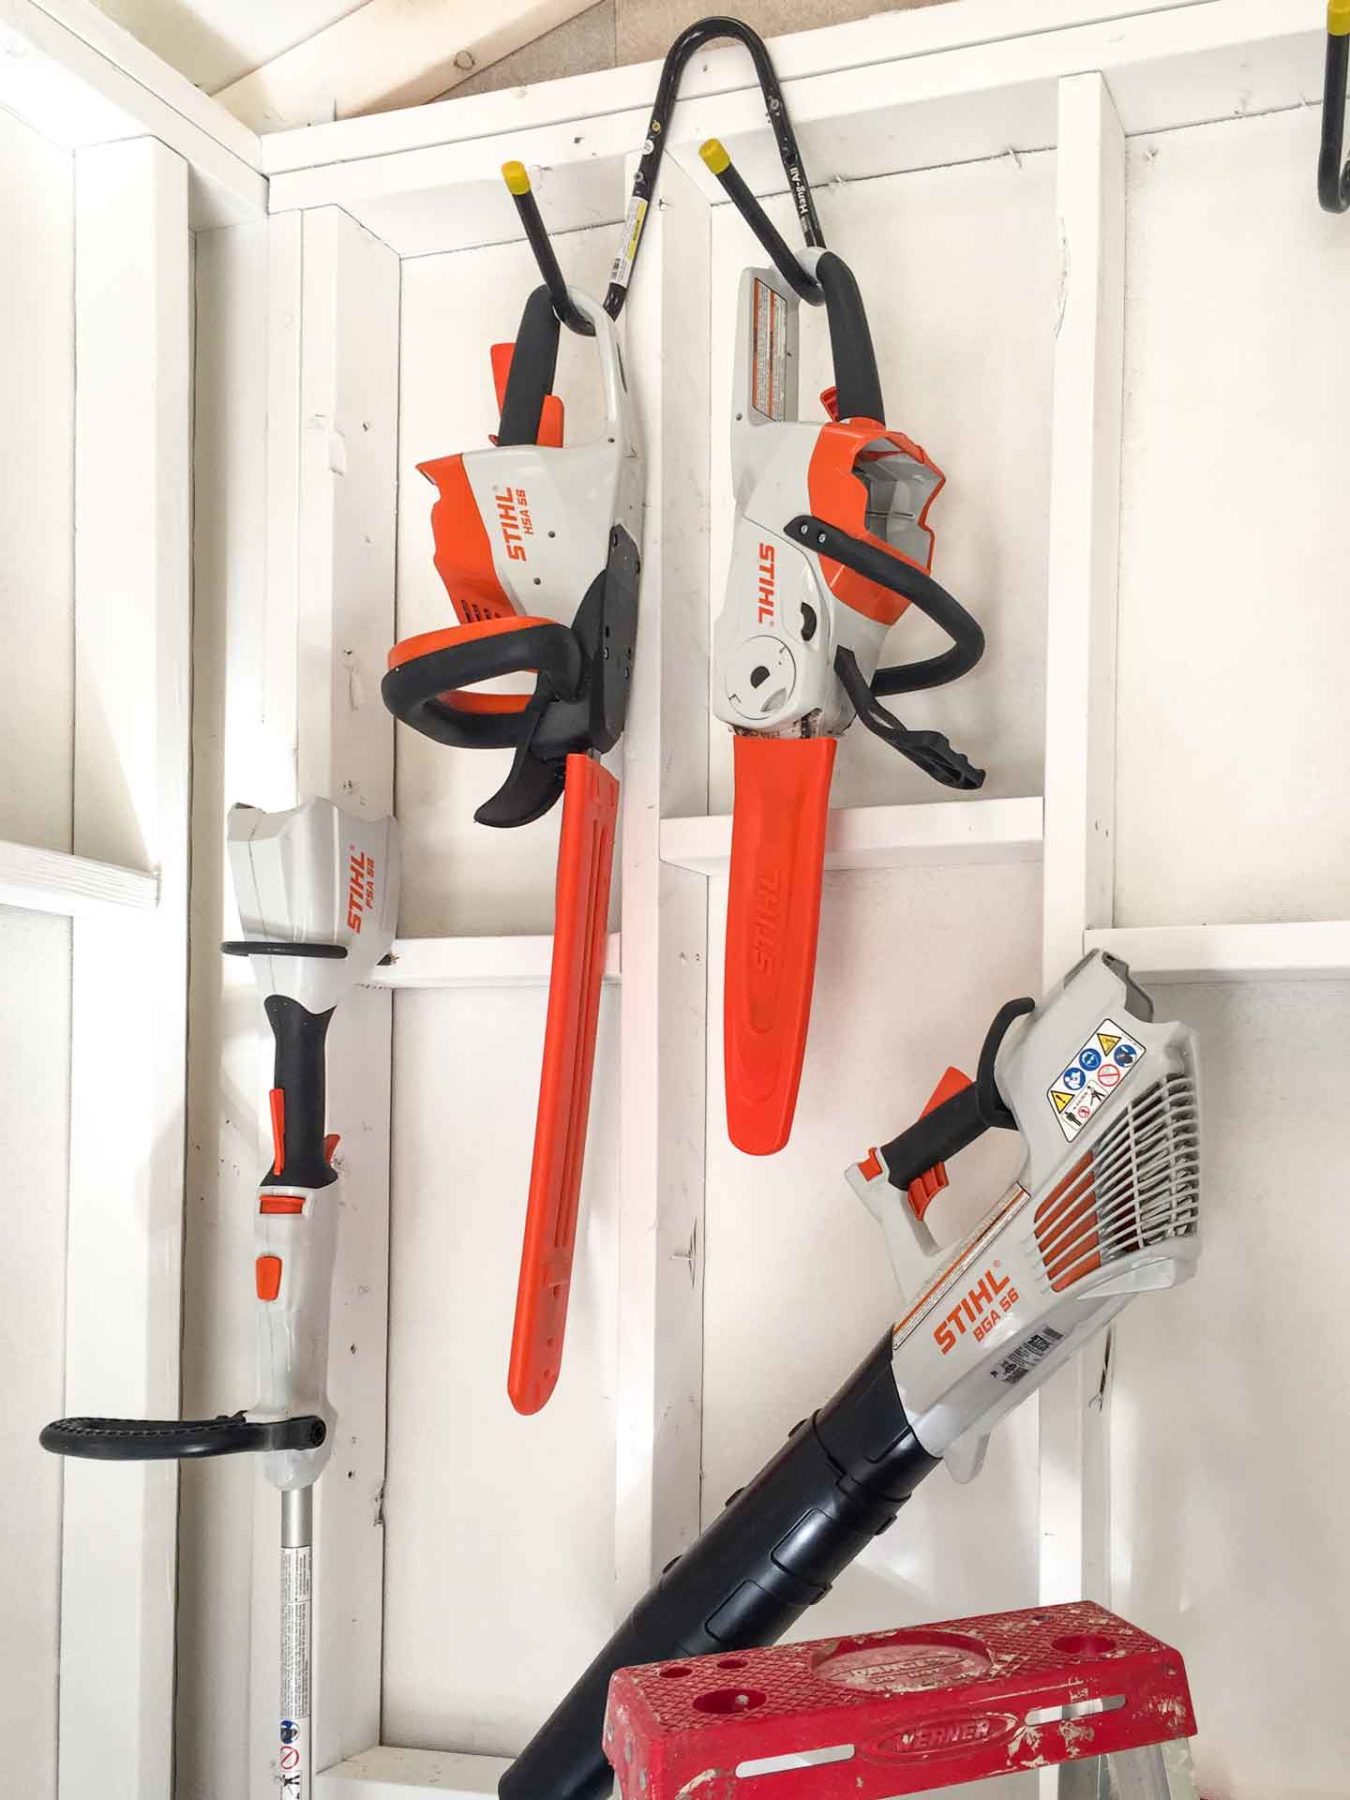 STIHL-battery-powered-tools-hanging-in-pub-shed